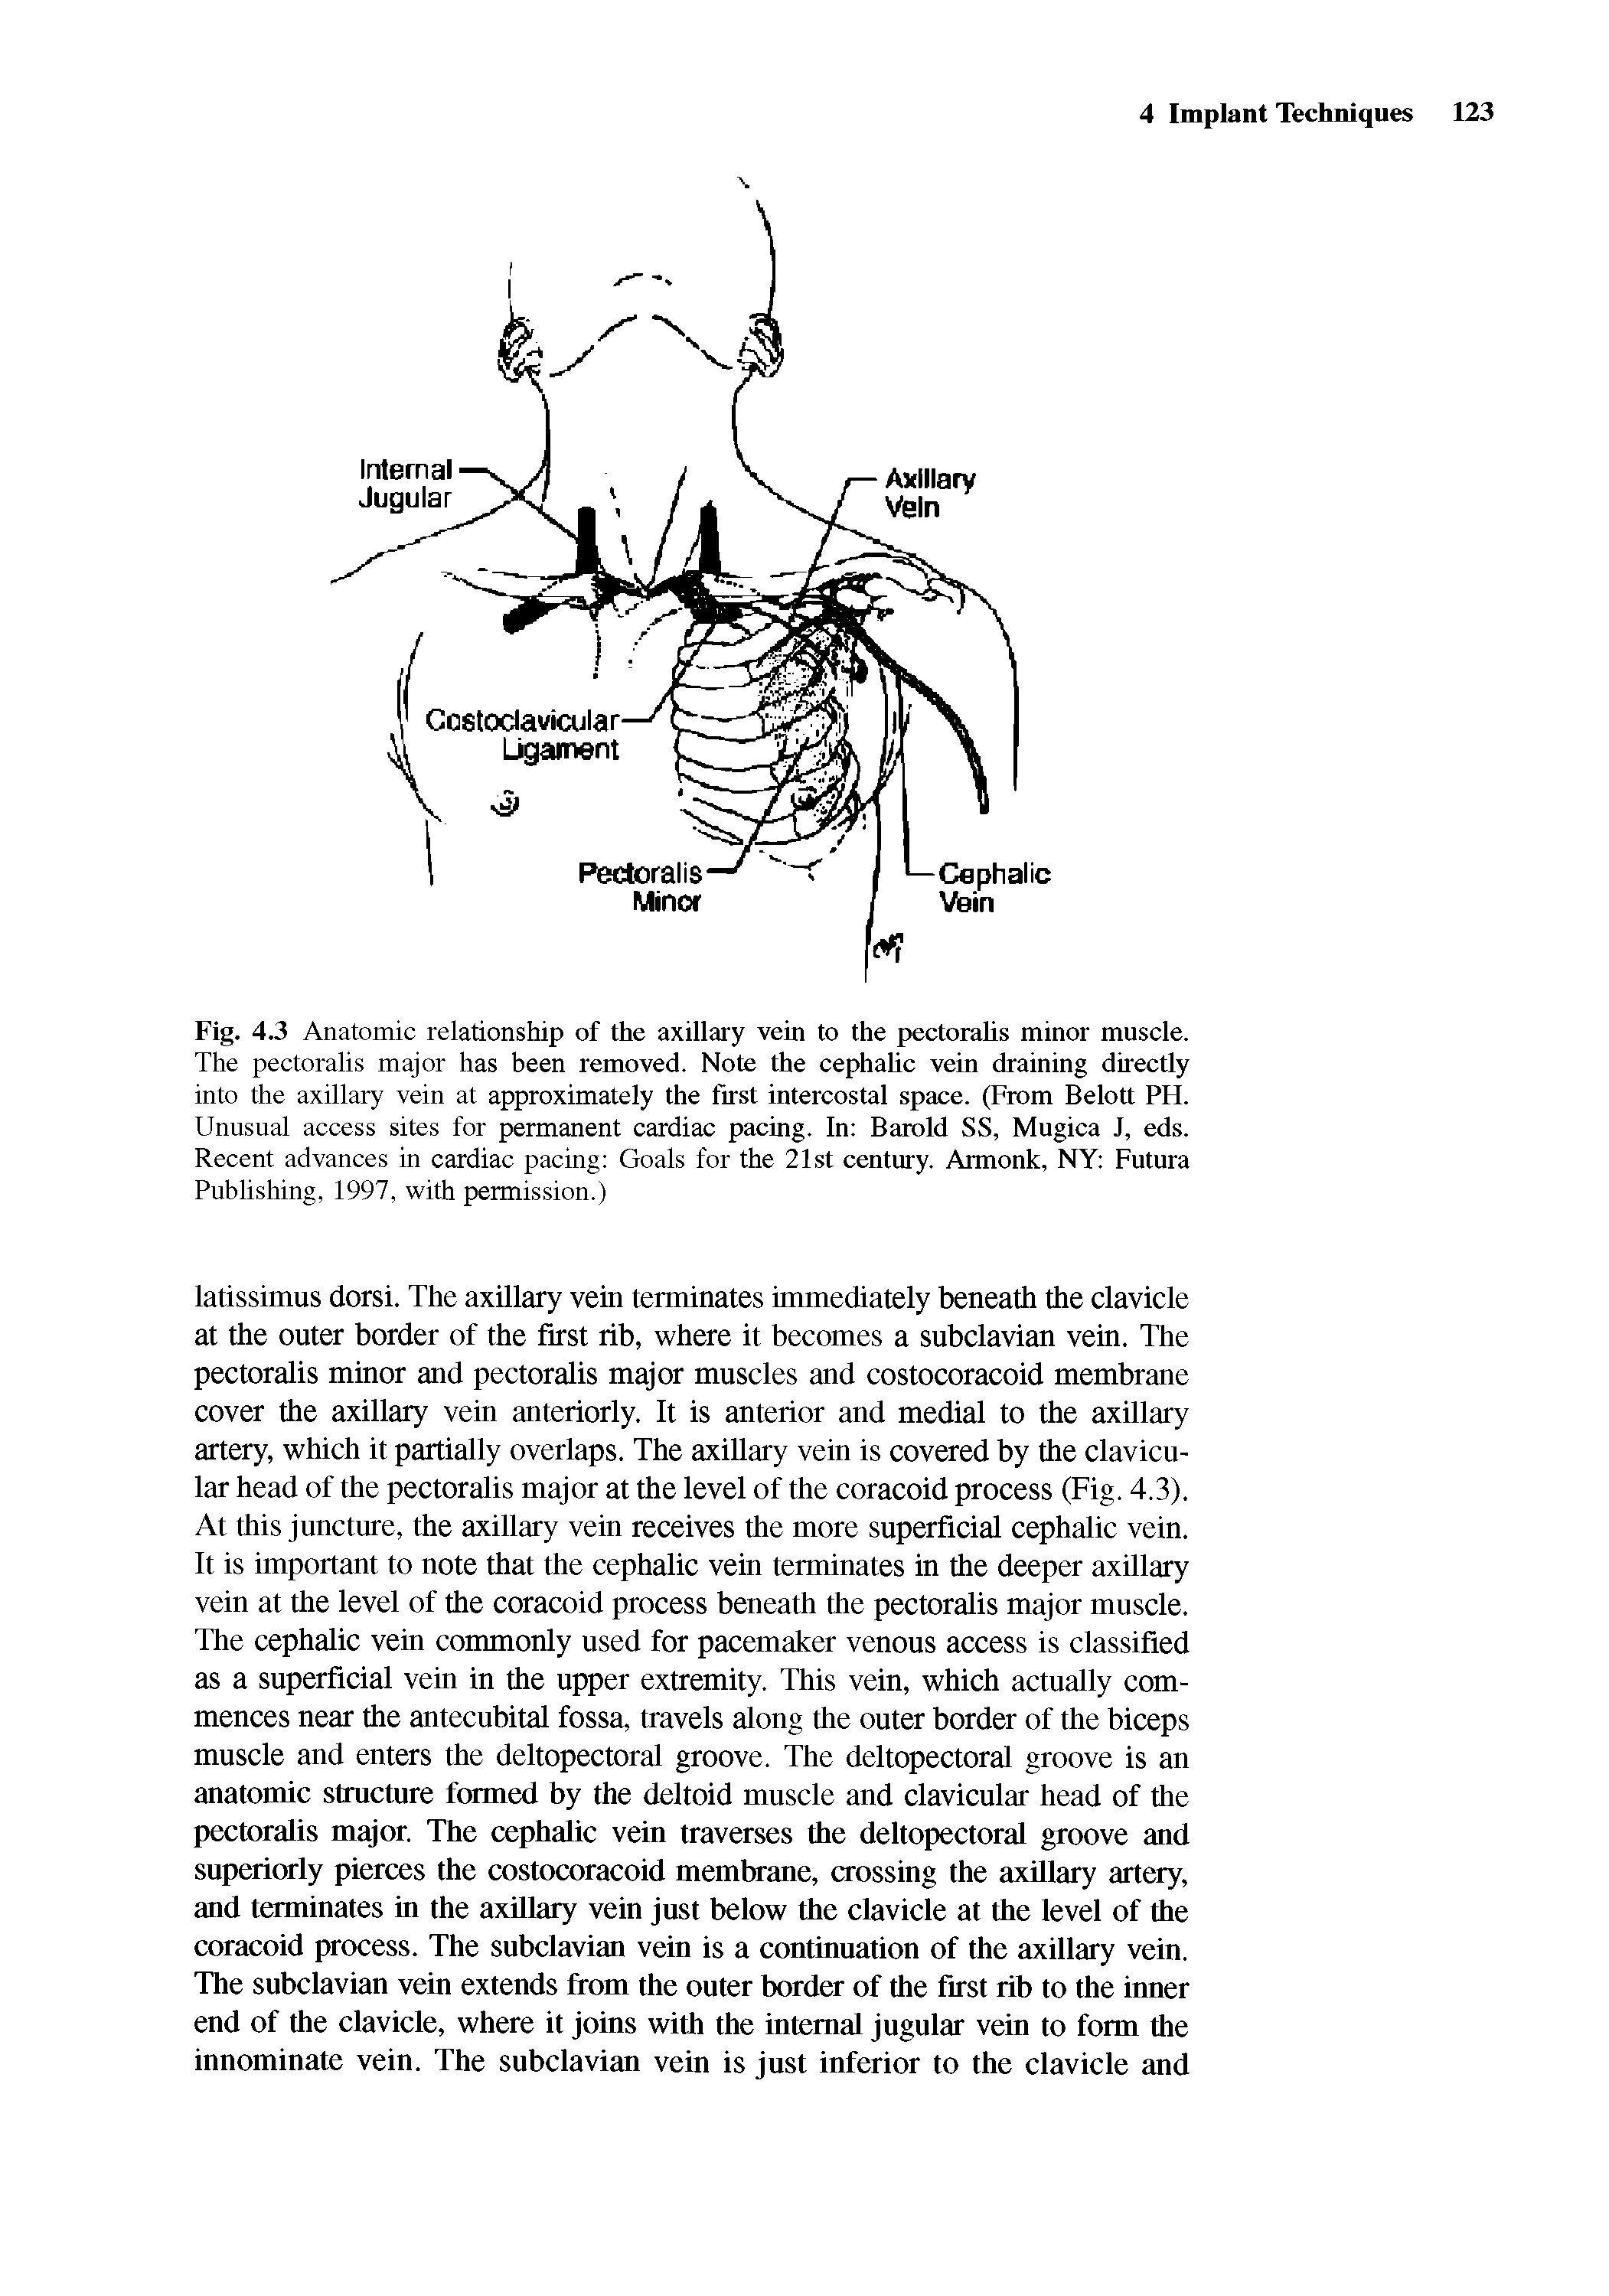 Fig. 4.3 Anatomic relationship of the axillary vein to the pectoralis minor muscle. The pectoralis major has been removed. Note the cephalic vein draining directly into the axillary vein at approximately the first intercostal space. (From Belott PH. Unusual access sites for permanent cardiac pacing. In Barold SS, Mugica J, eds. Recent advances in cardiac pacing Goals for the 21st century. Armonk, NY Futura Publishing, 1997, with permission.)...